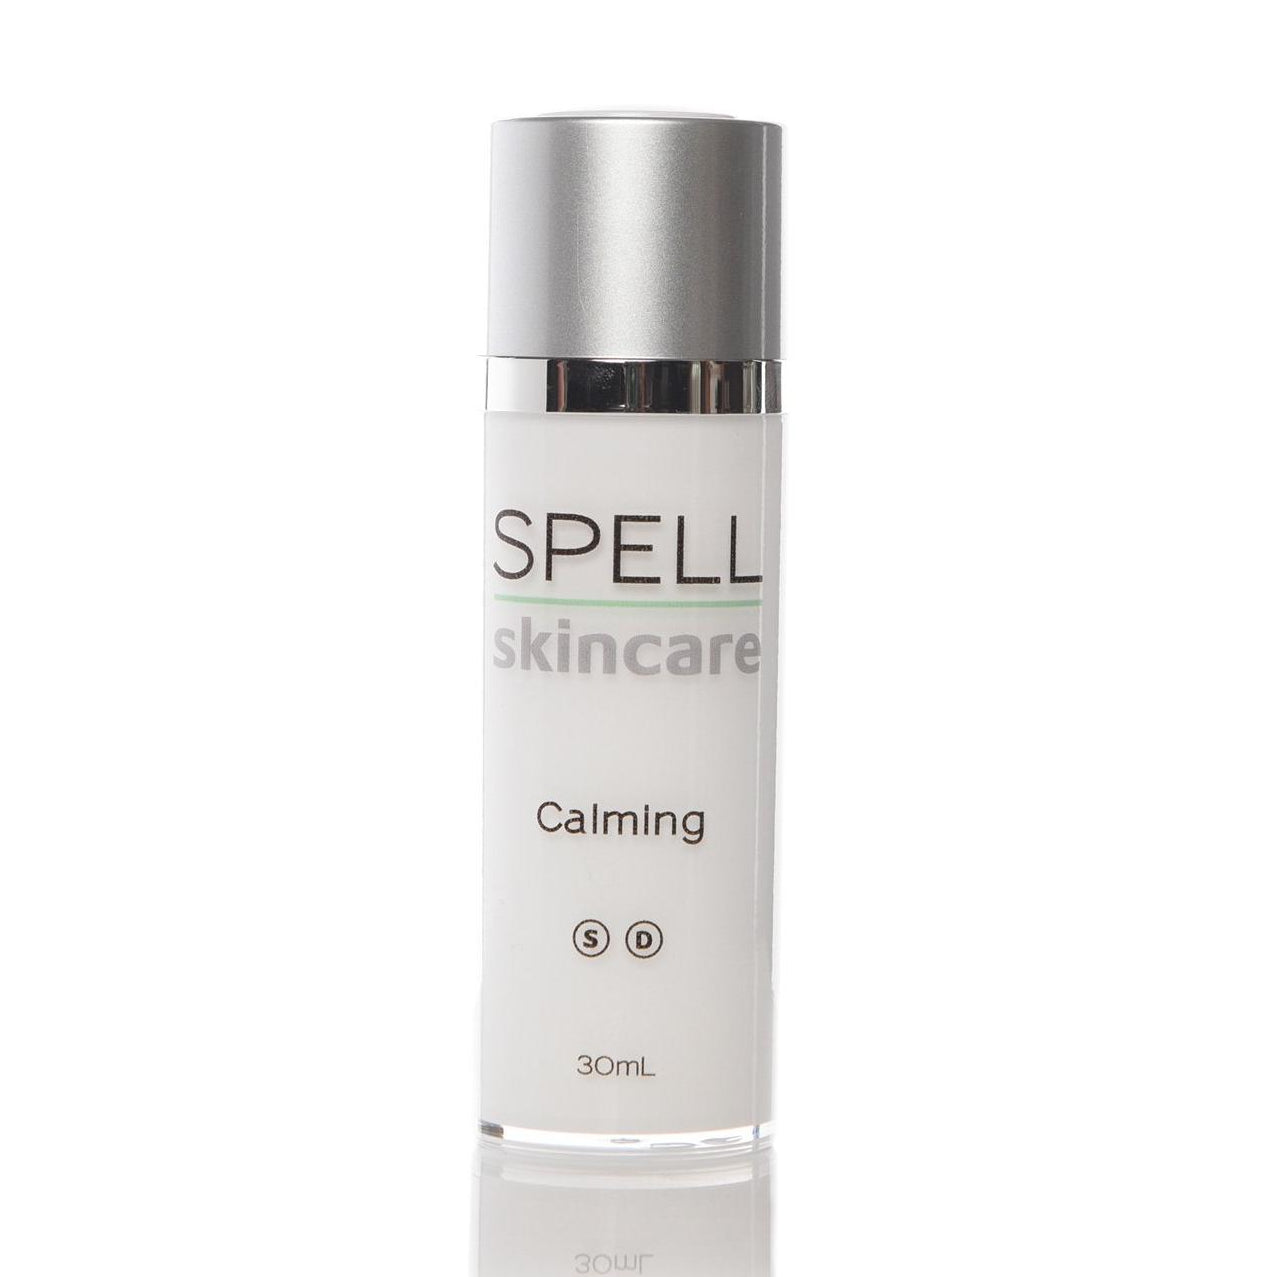 Spell skincare white bottle of Calming with silver top on white background